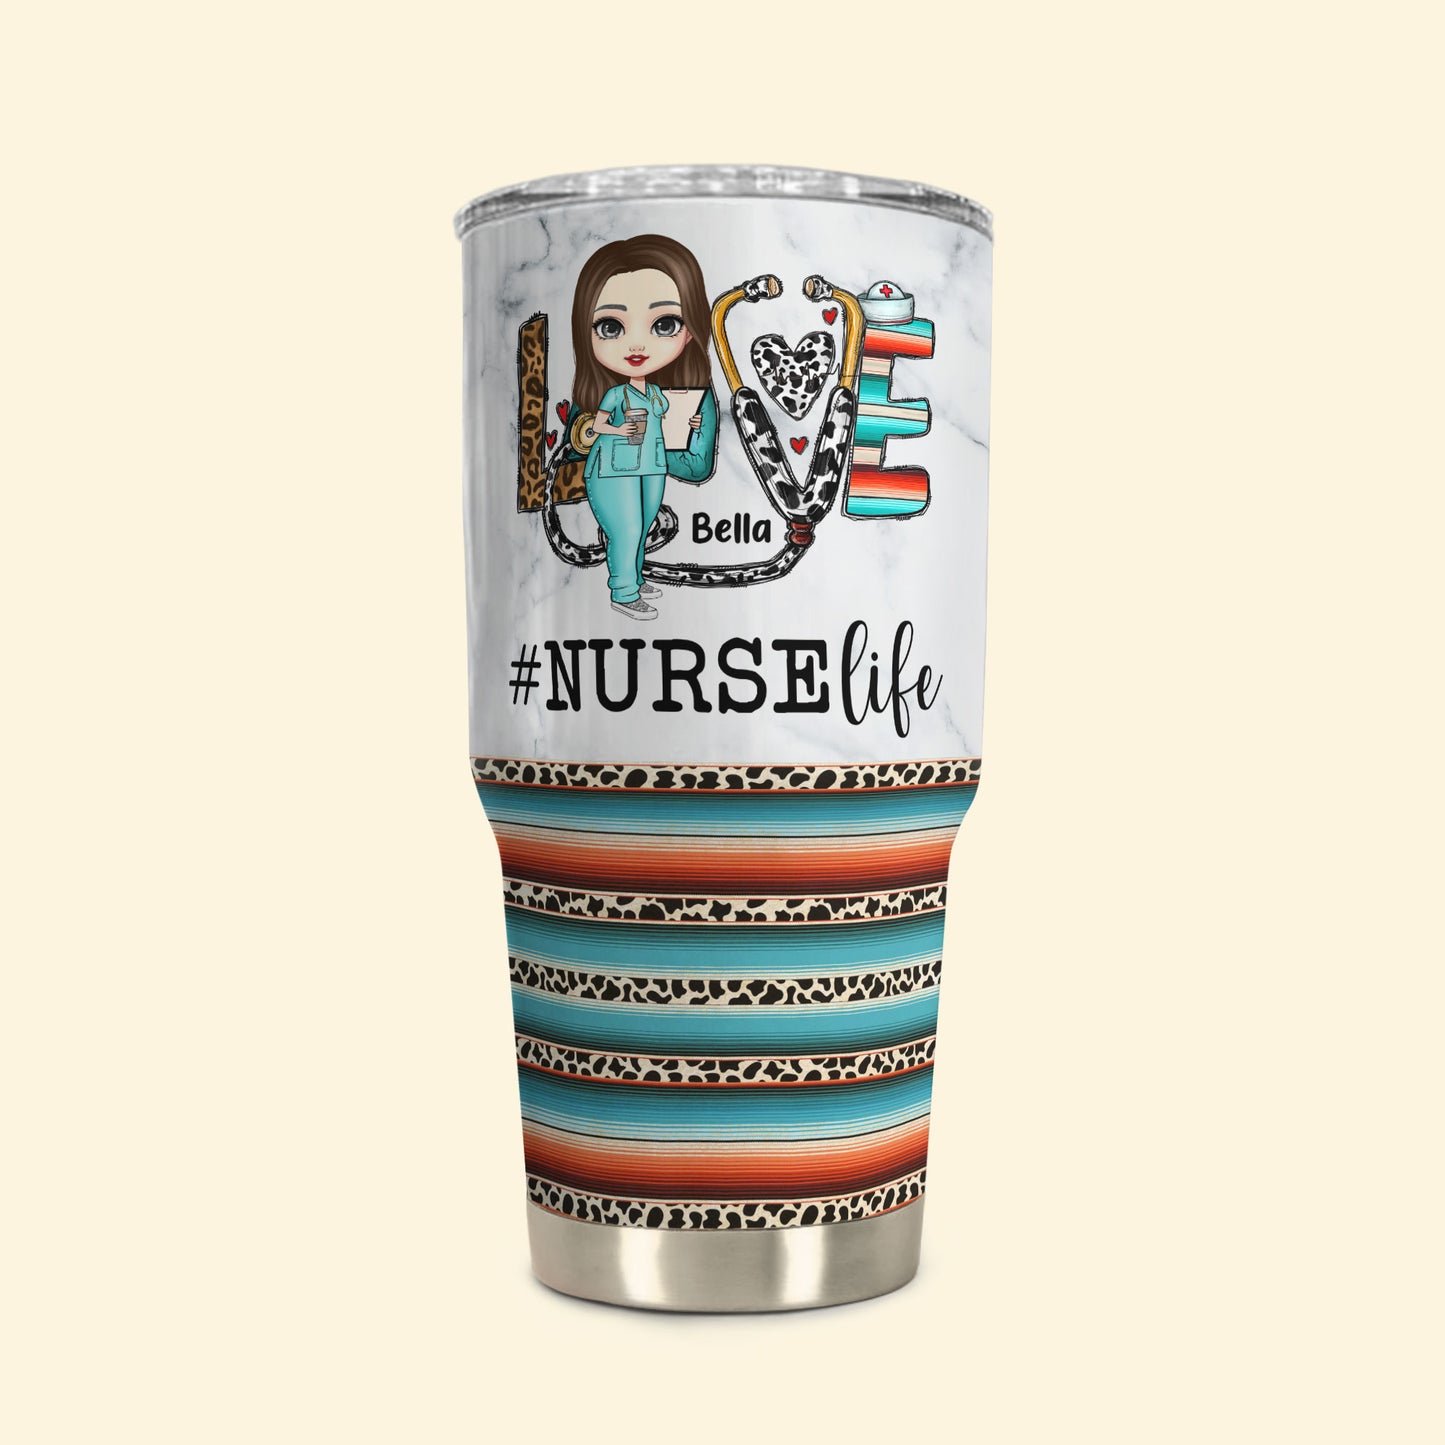 Love #Nurselife - Personalized 30oz Tumbler - Birthday Gift, Gifts For Nurse, Doctor, Women, Mom, Daughters, Sisters, Besties, Colleagues